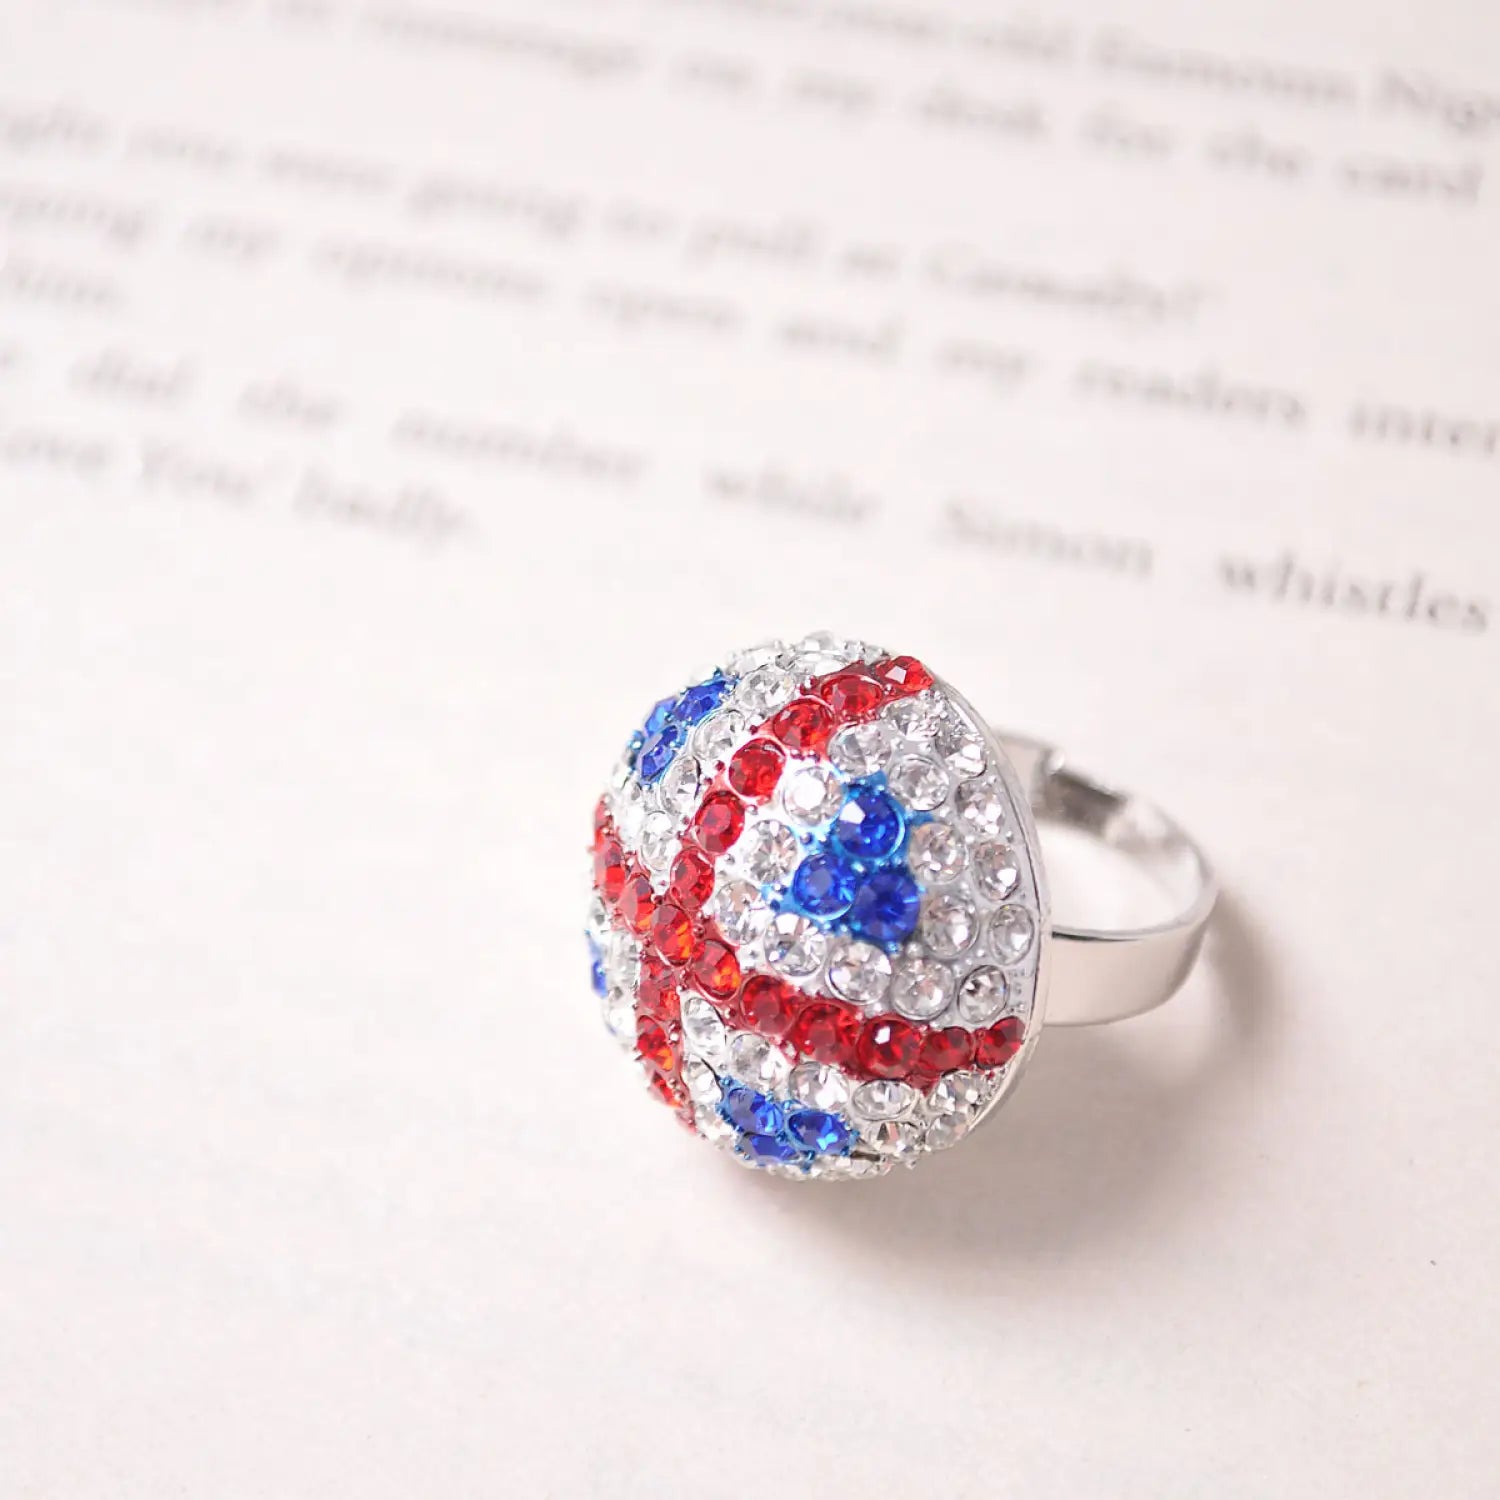 Union Jack Sparkling Adjustable Ring with red, white, and blue crystals